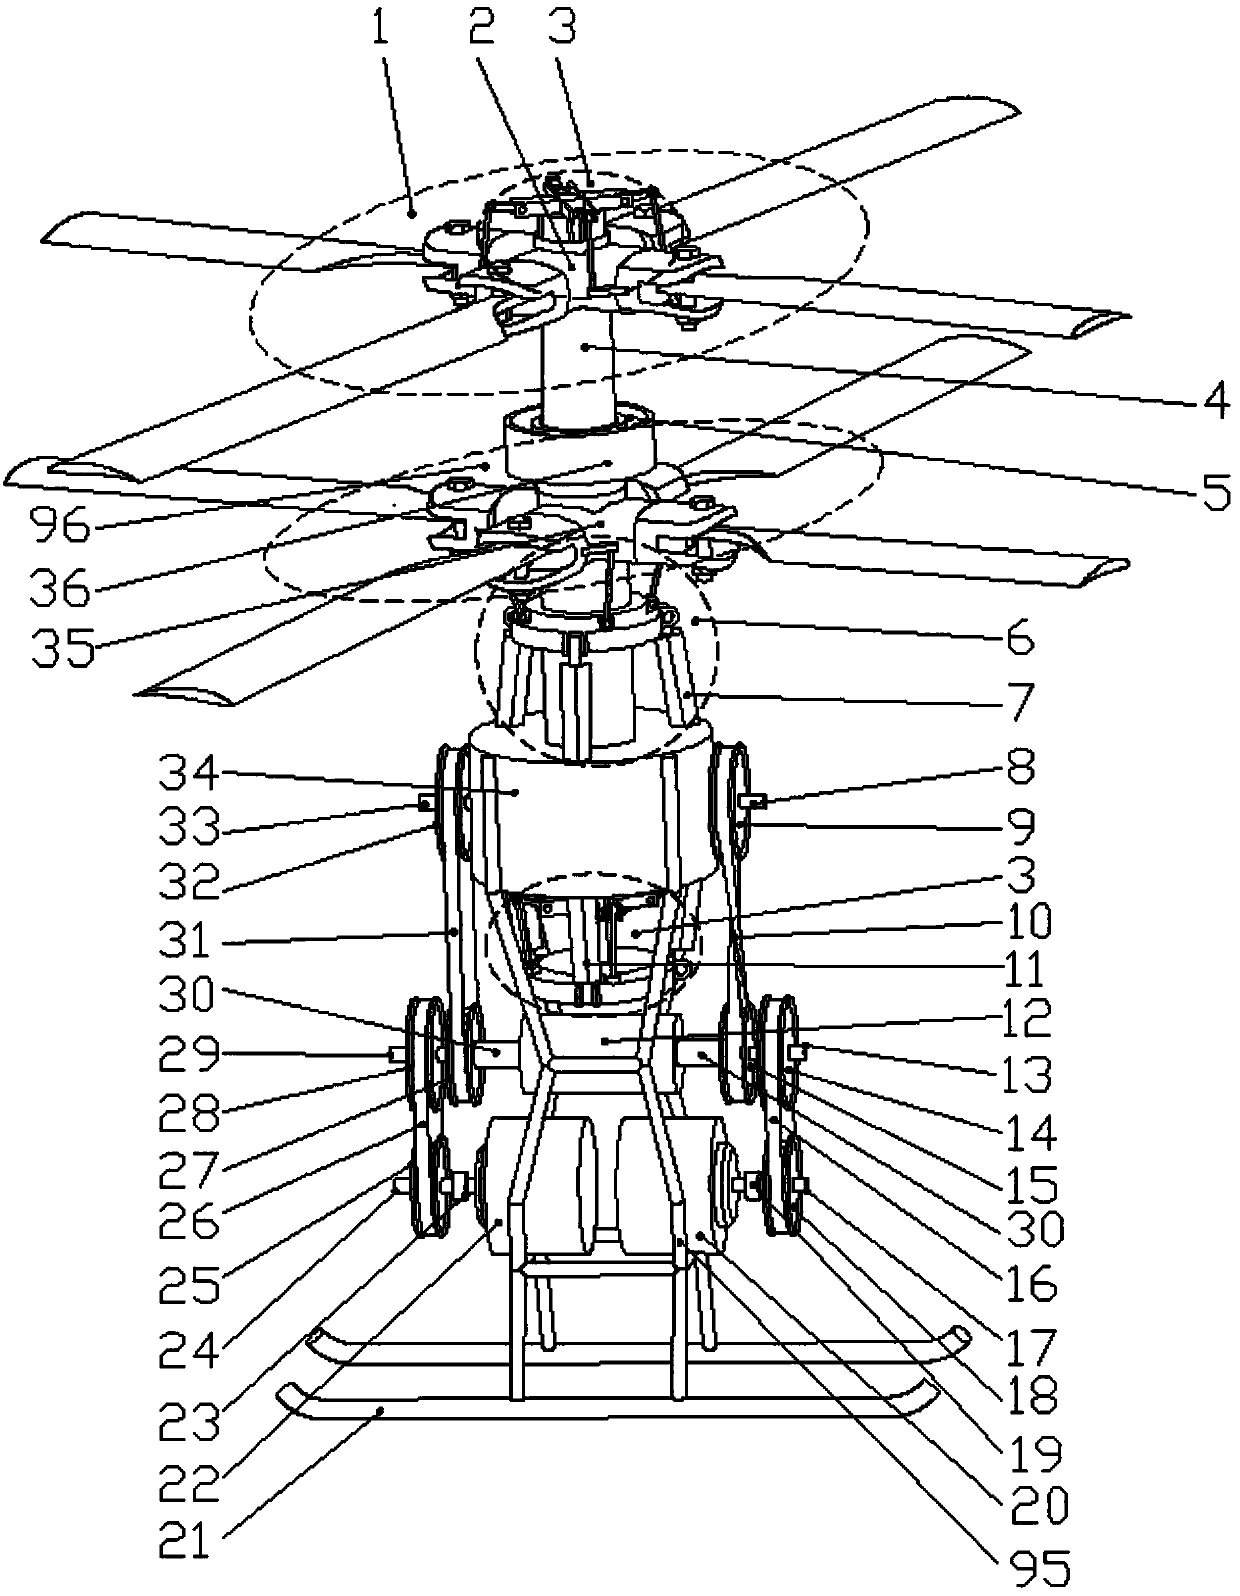 Parallel dual-engine coaxial unmanned helicopter